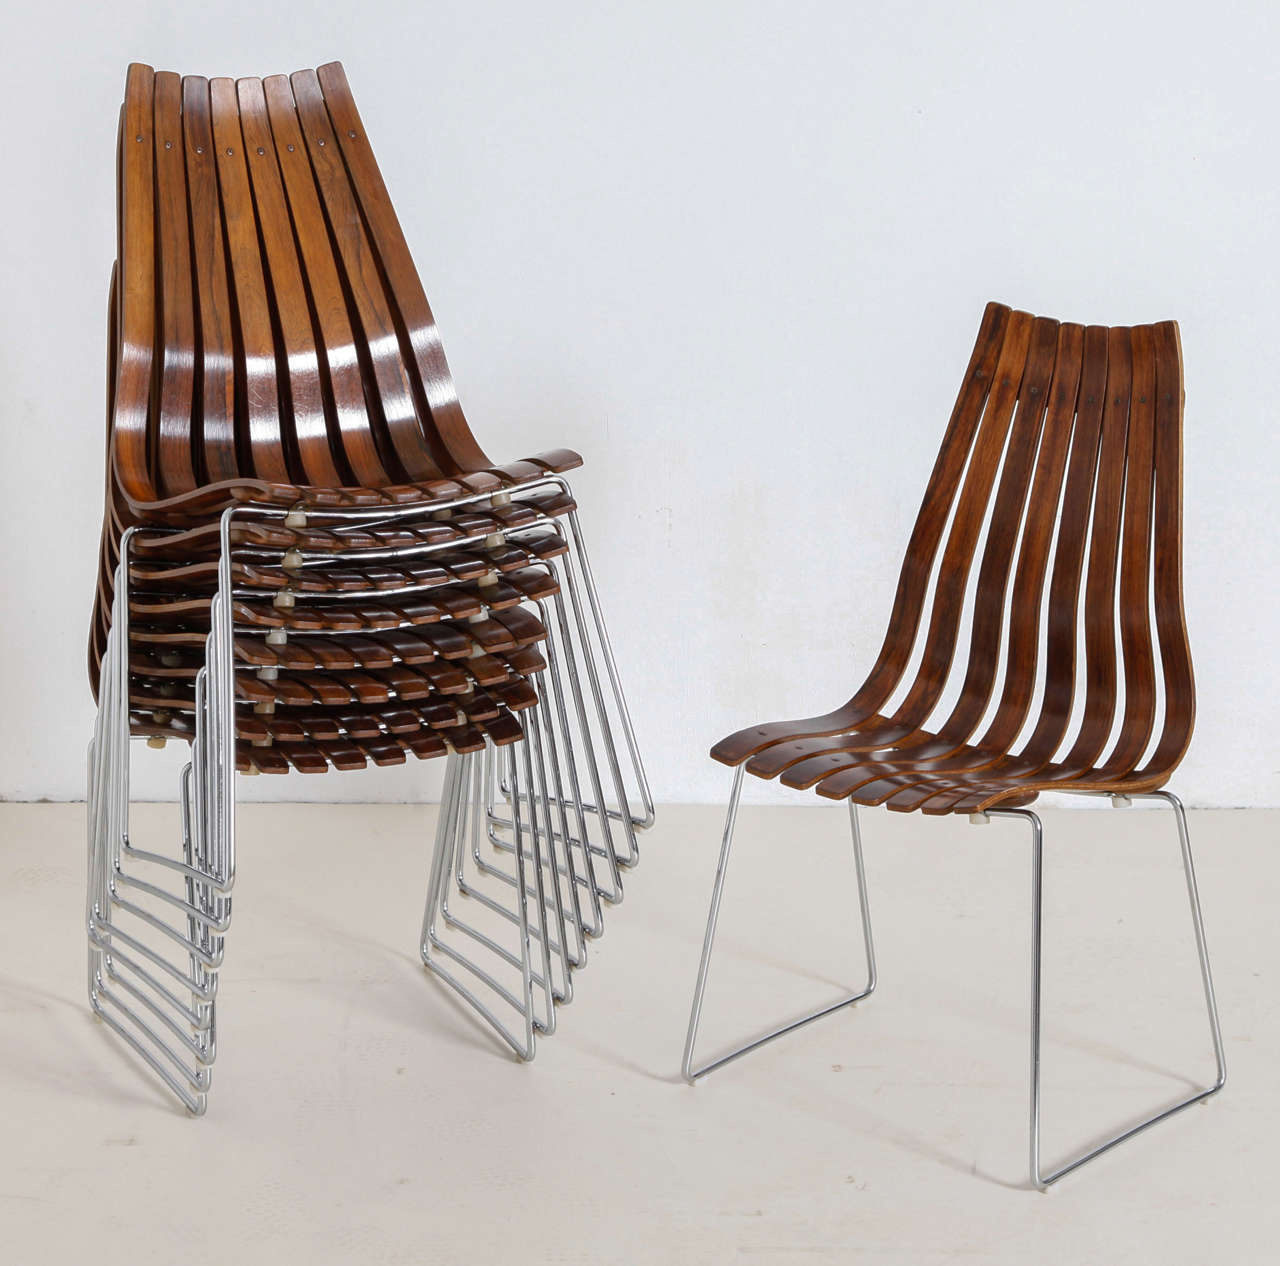 10 chairs designed by hans Brattrud, Norway 1970's made by Hove, Oslo.
Chairs in Rosewood